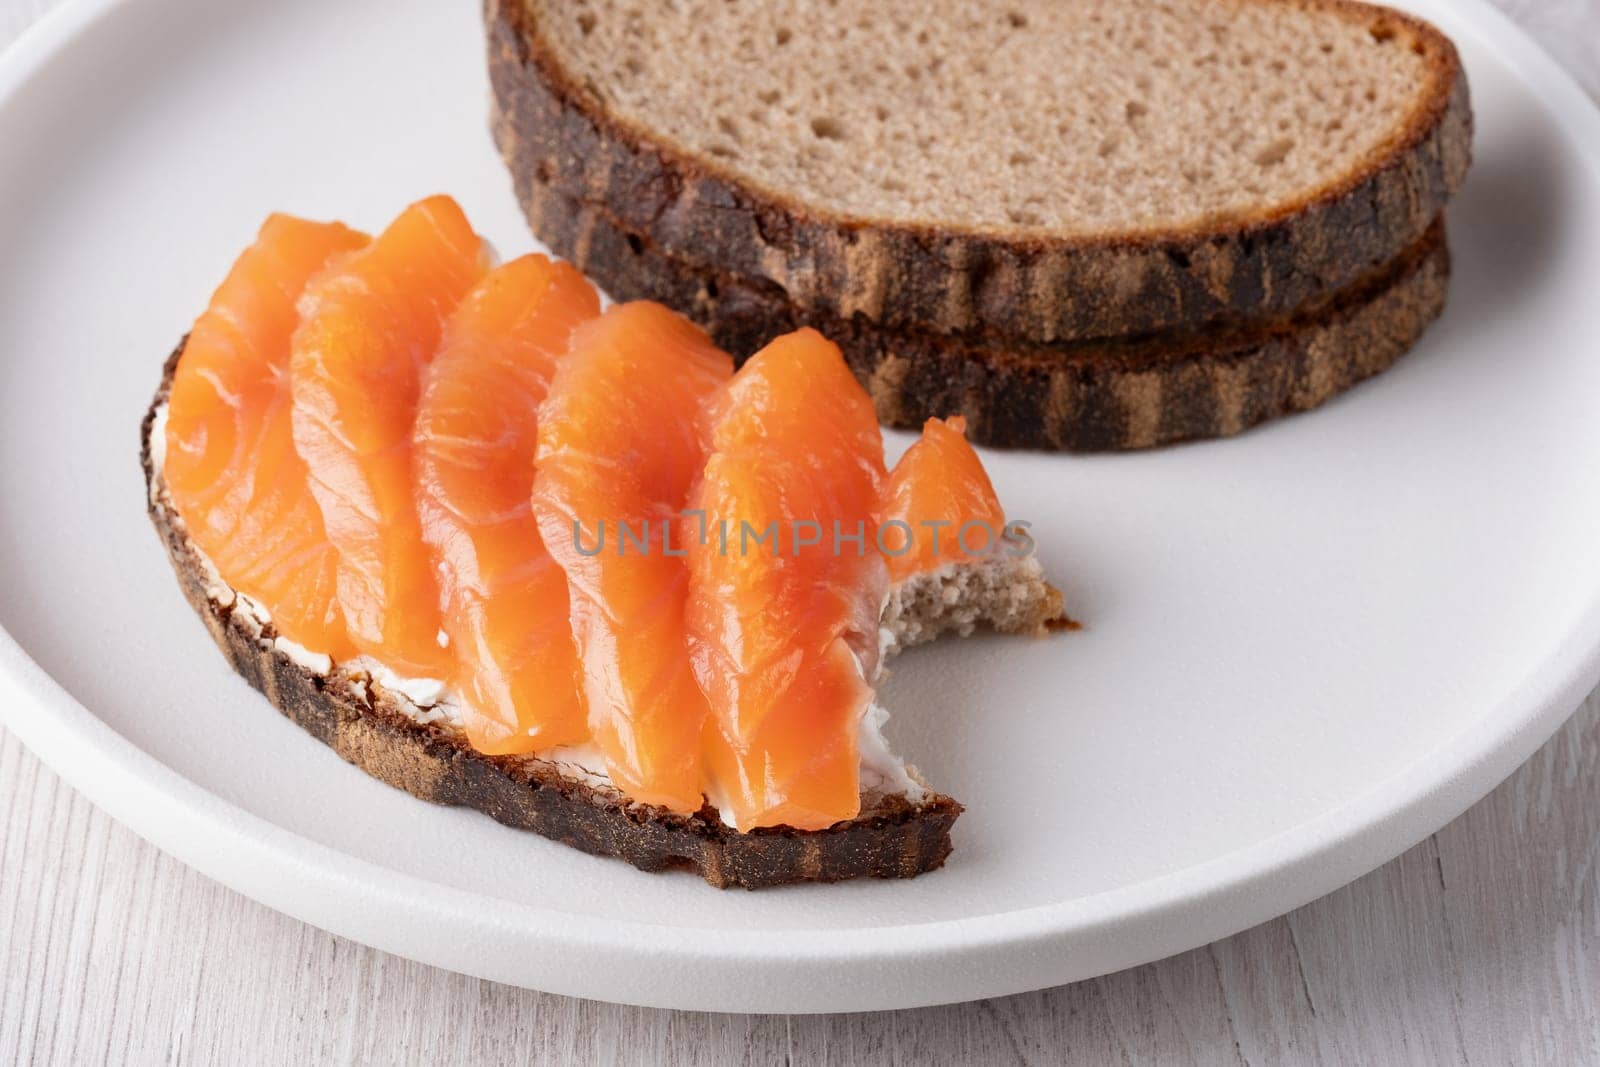 Rye sandwich with salmon and cream cheese on white wooden table by NataliPopova